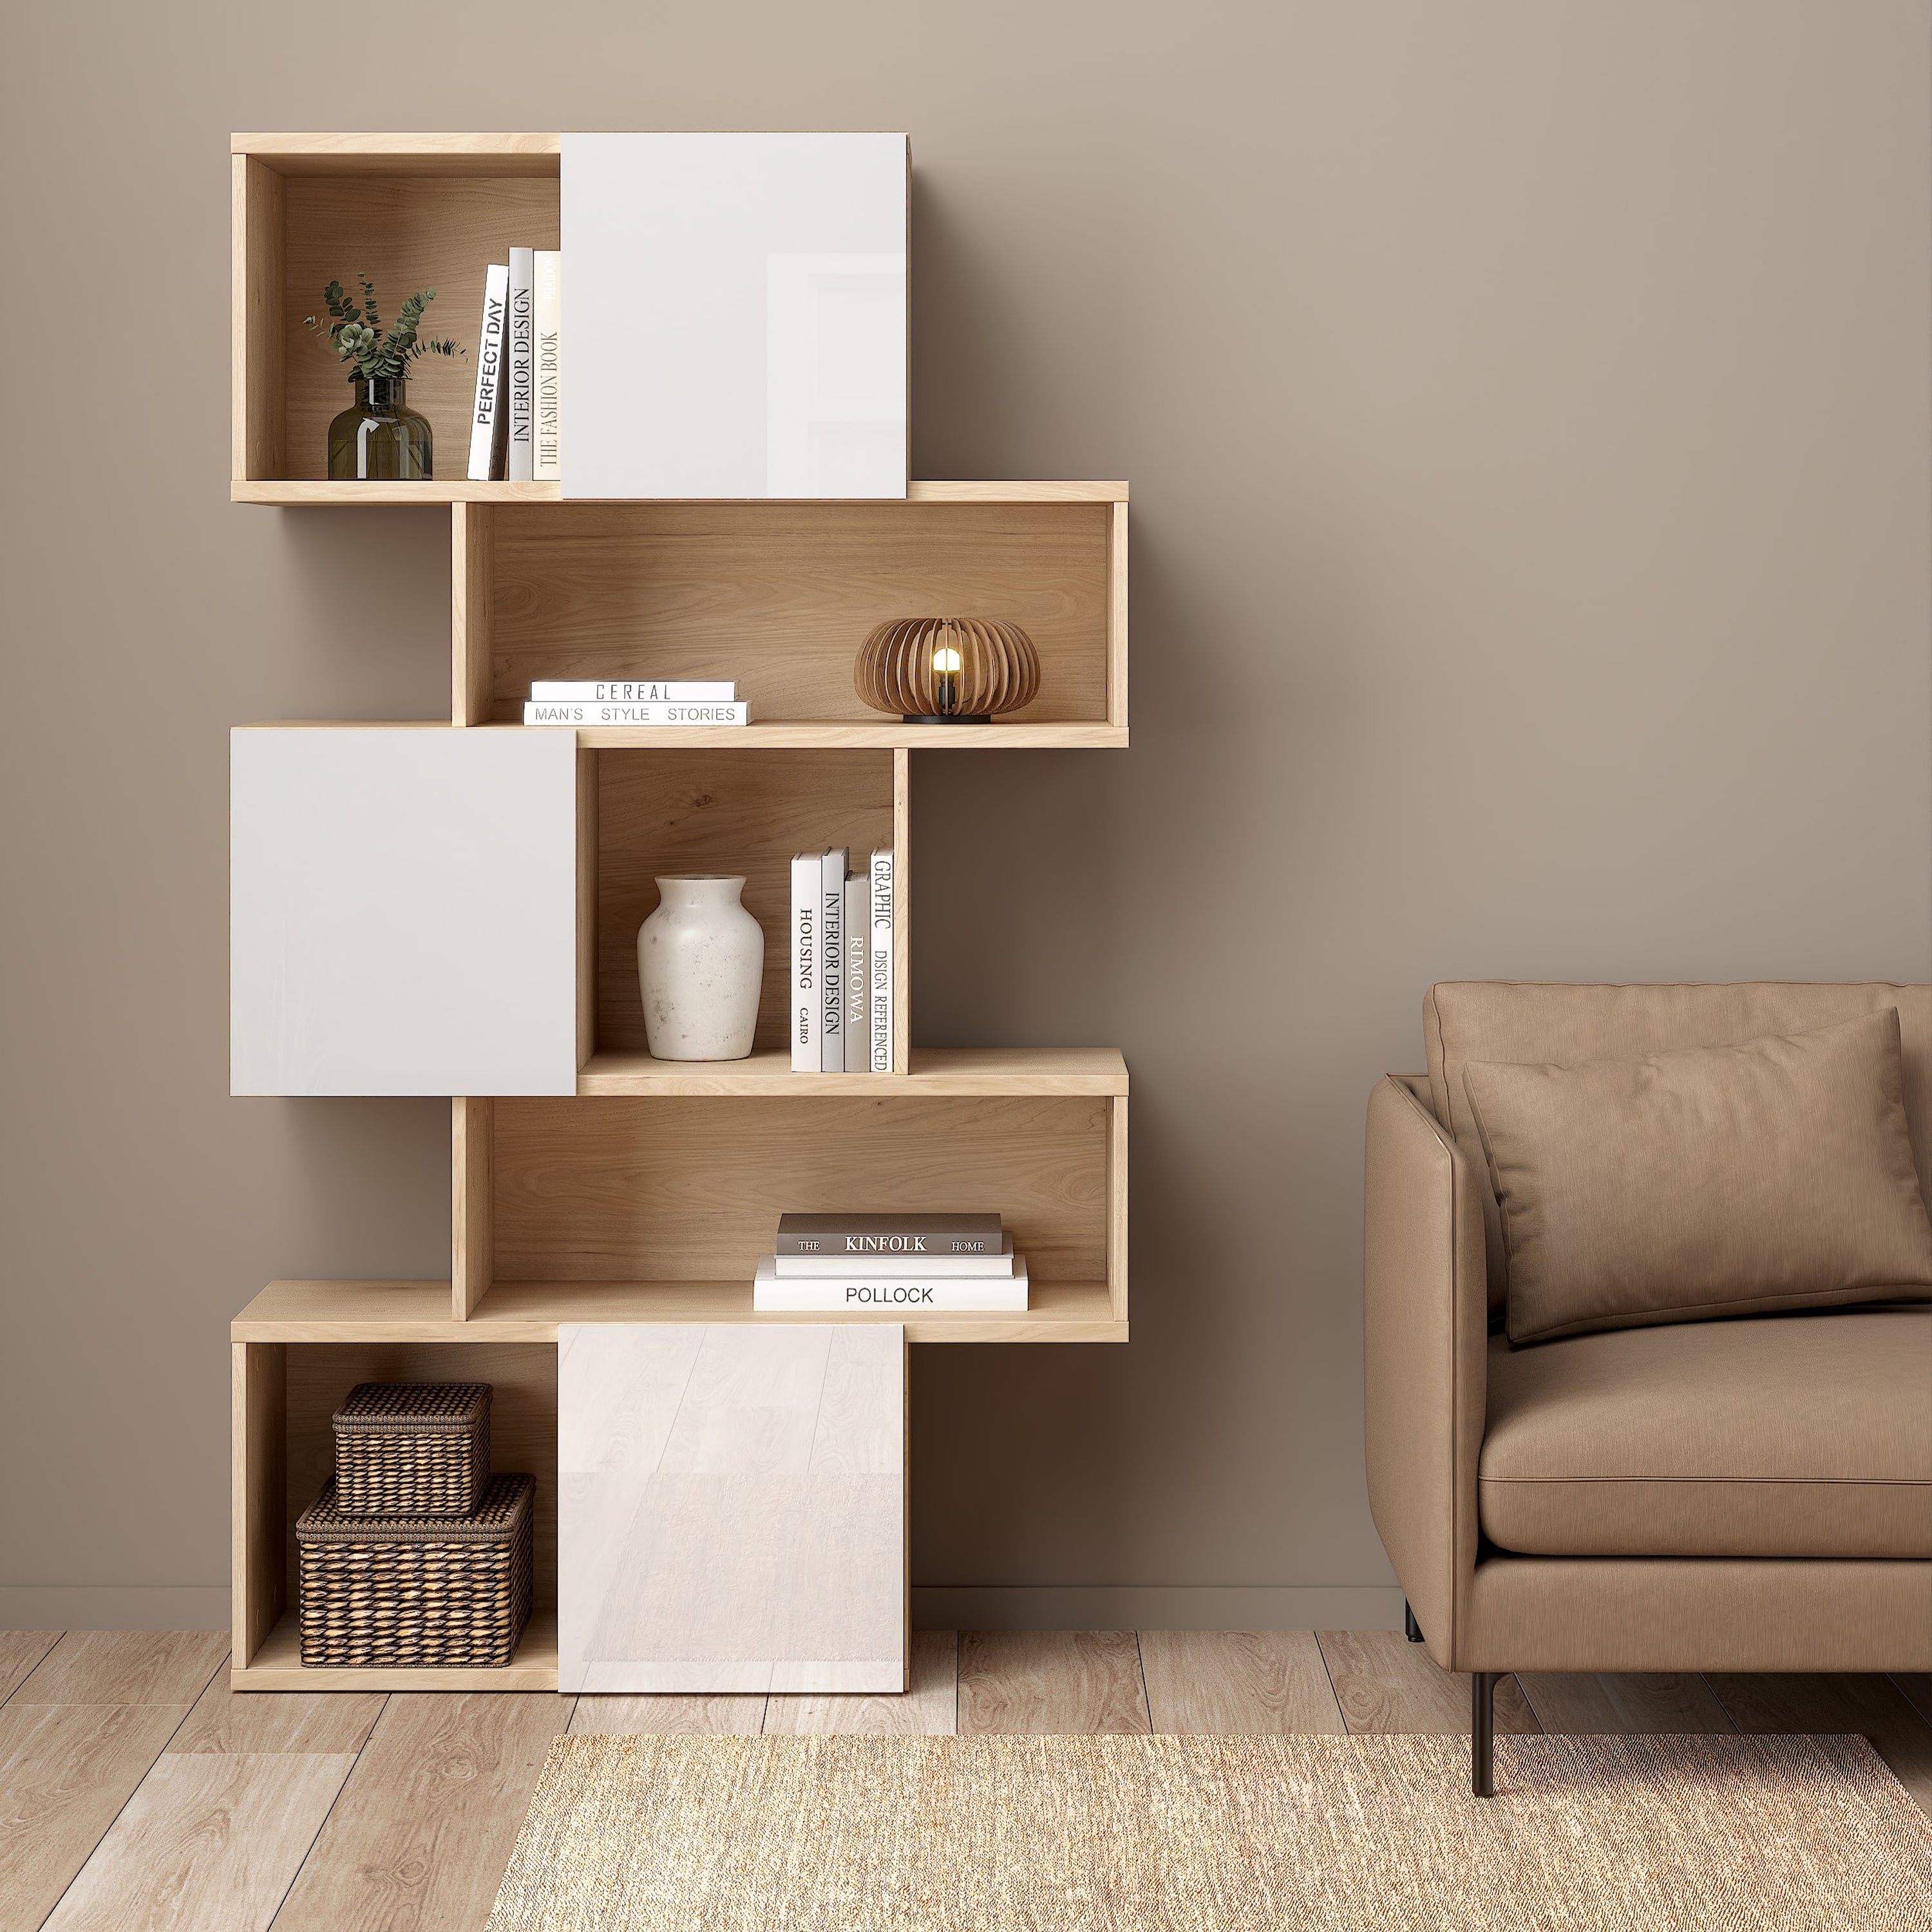 Maze Asymmetrical Bookcase with 3 Doors in Jackson Hickory and White High Gloss